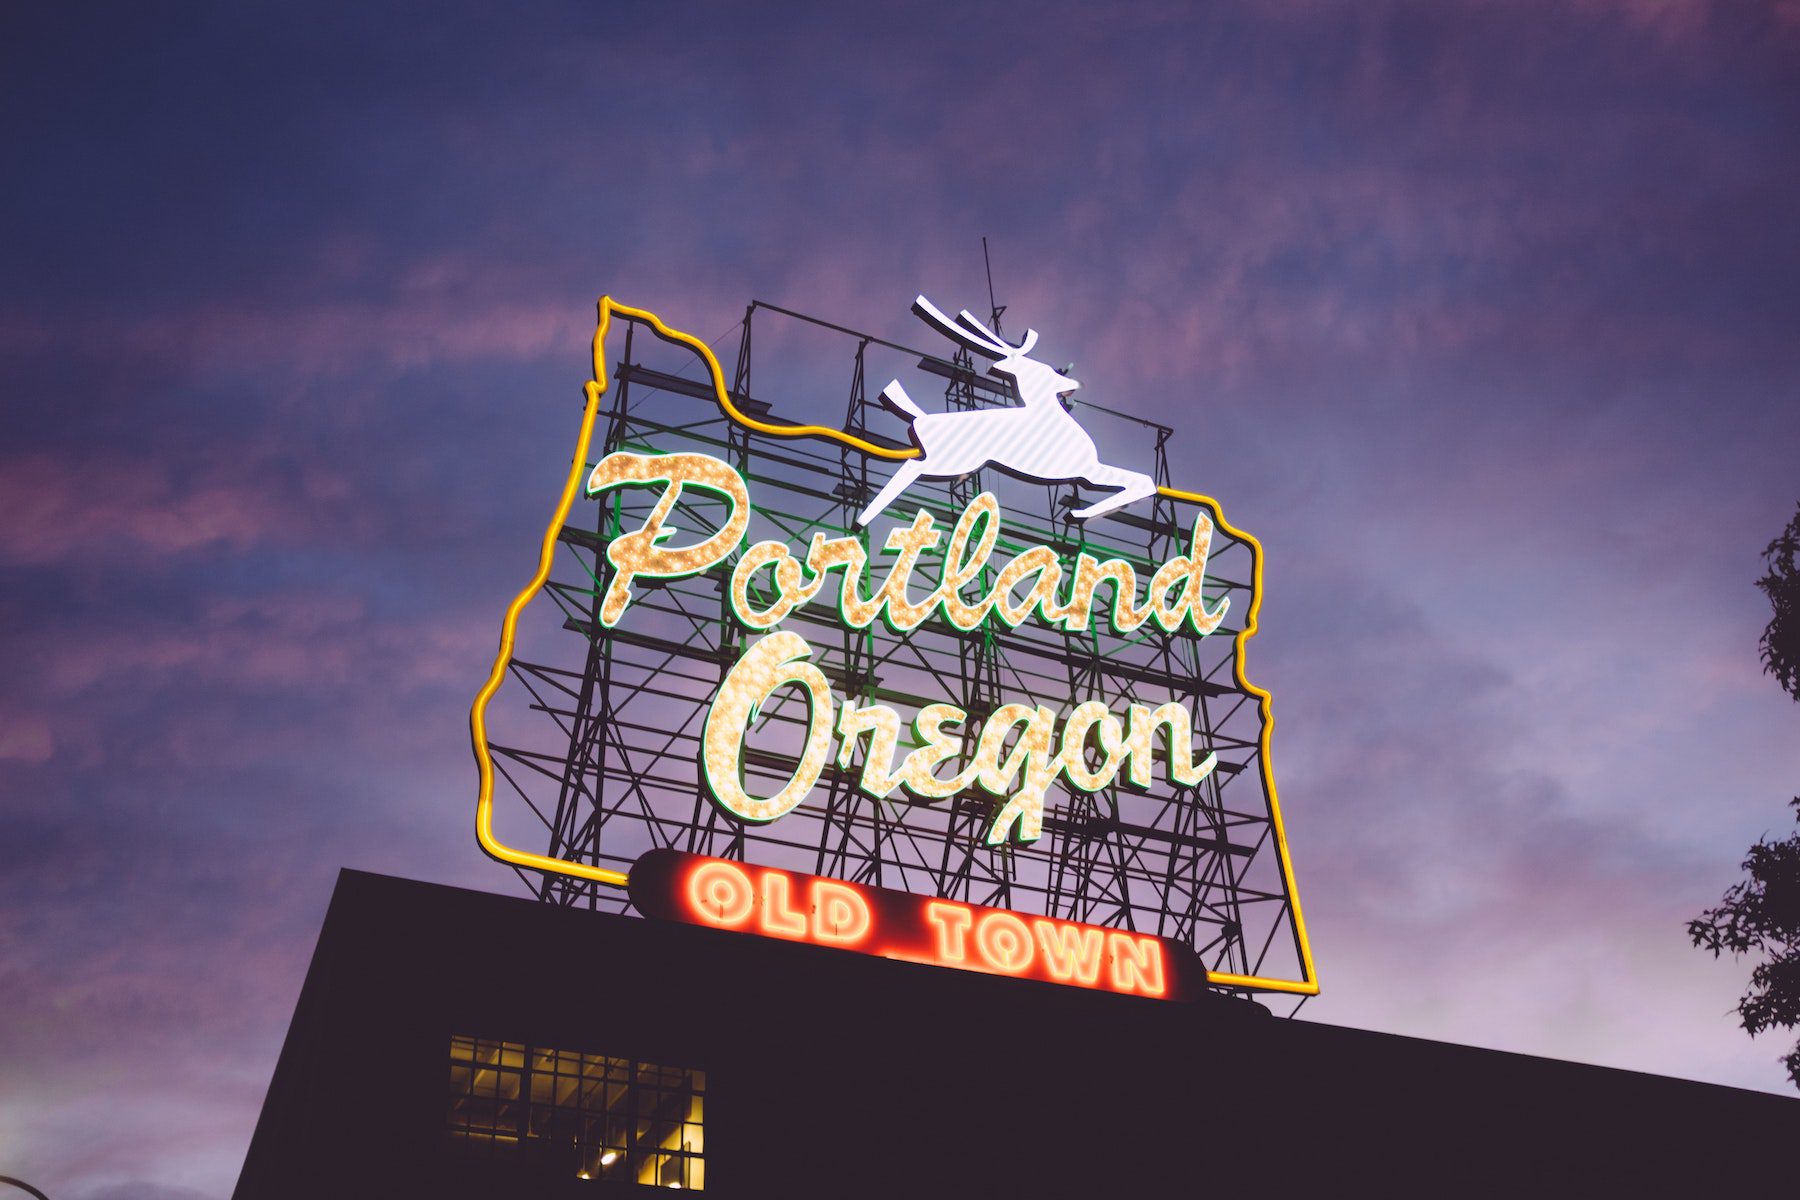 Portland Oregon sign in neon with outline of the state and a deer leaping, reading "Old Town" at bottom.